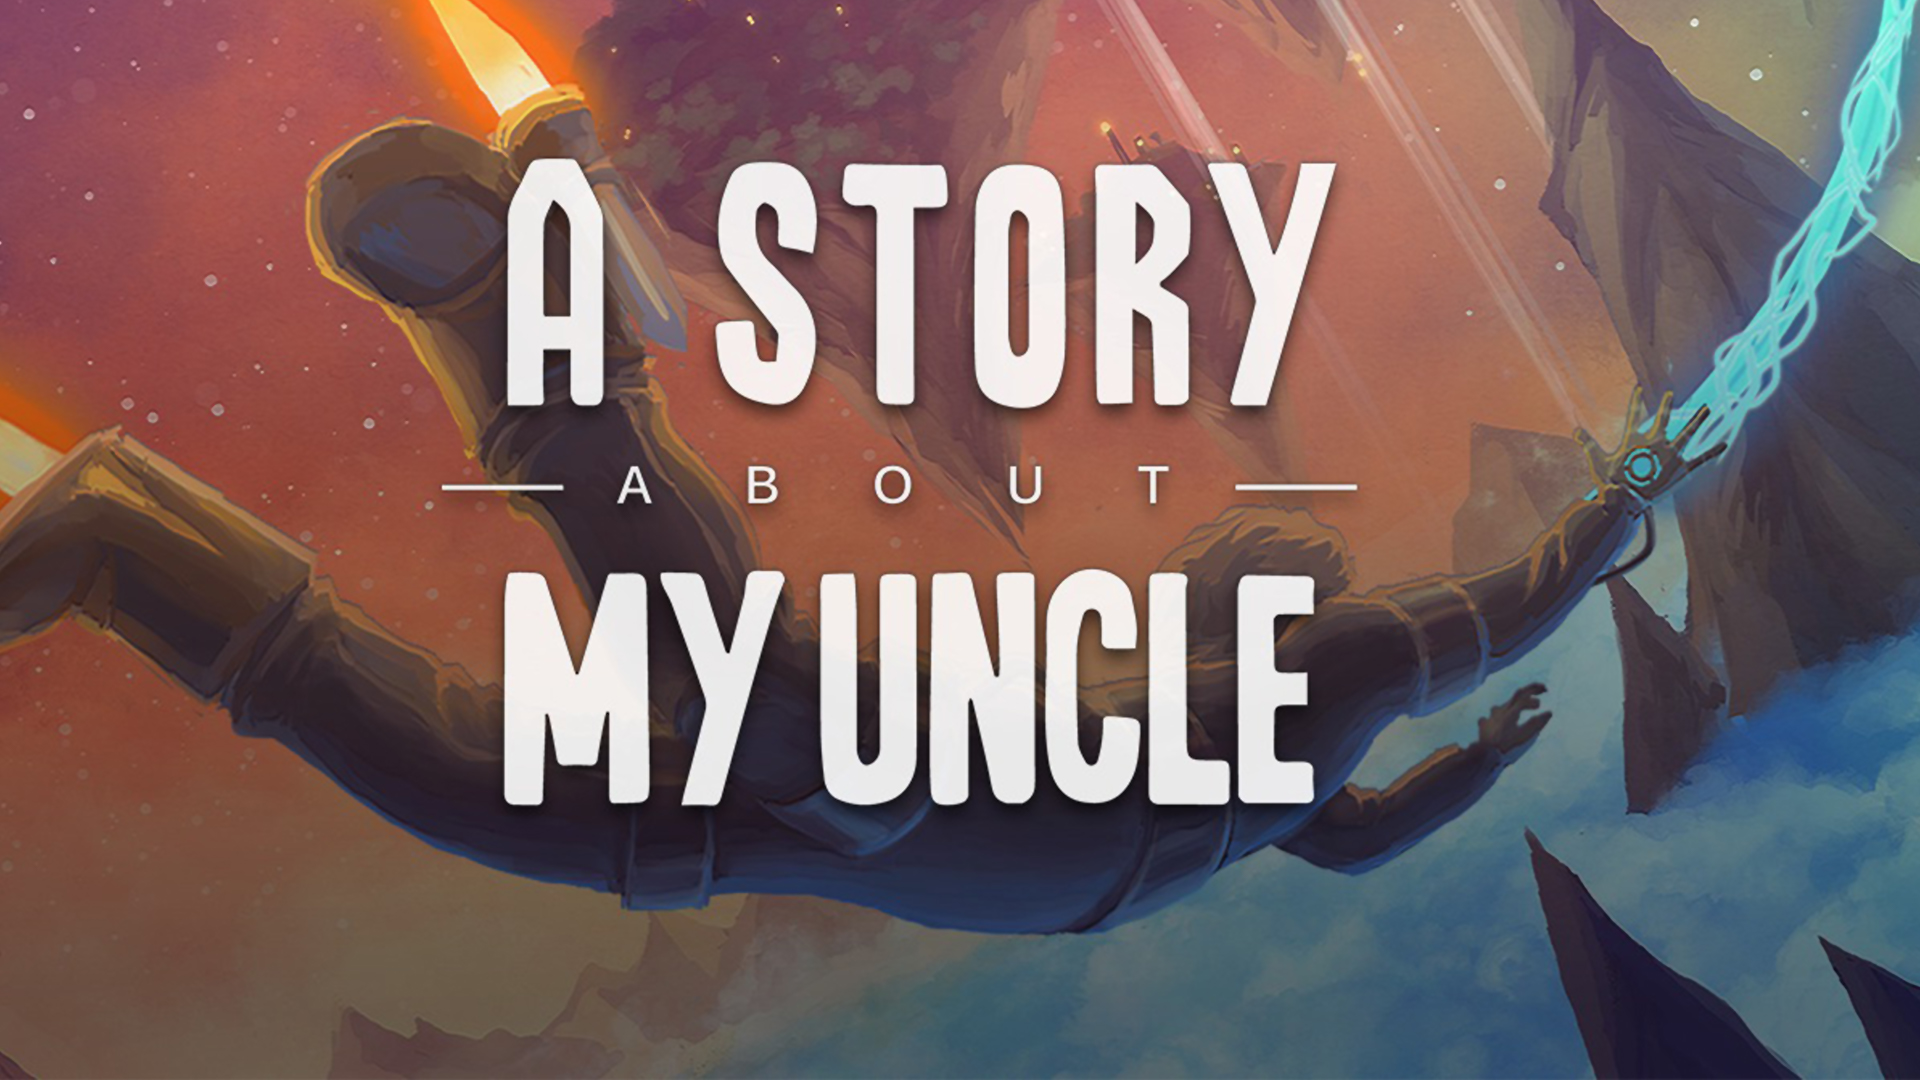 My friends uncle. Игра a story about my Uncle. A story about my Uncle лого. A story about my Uncle стим. History about my Uncle.